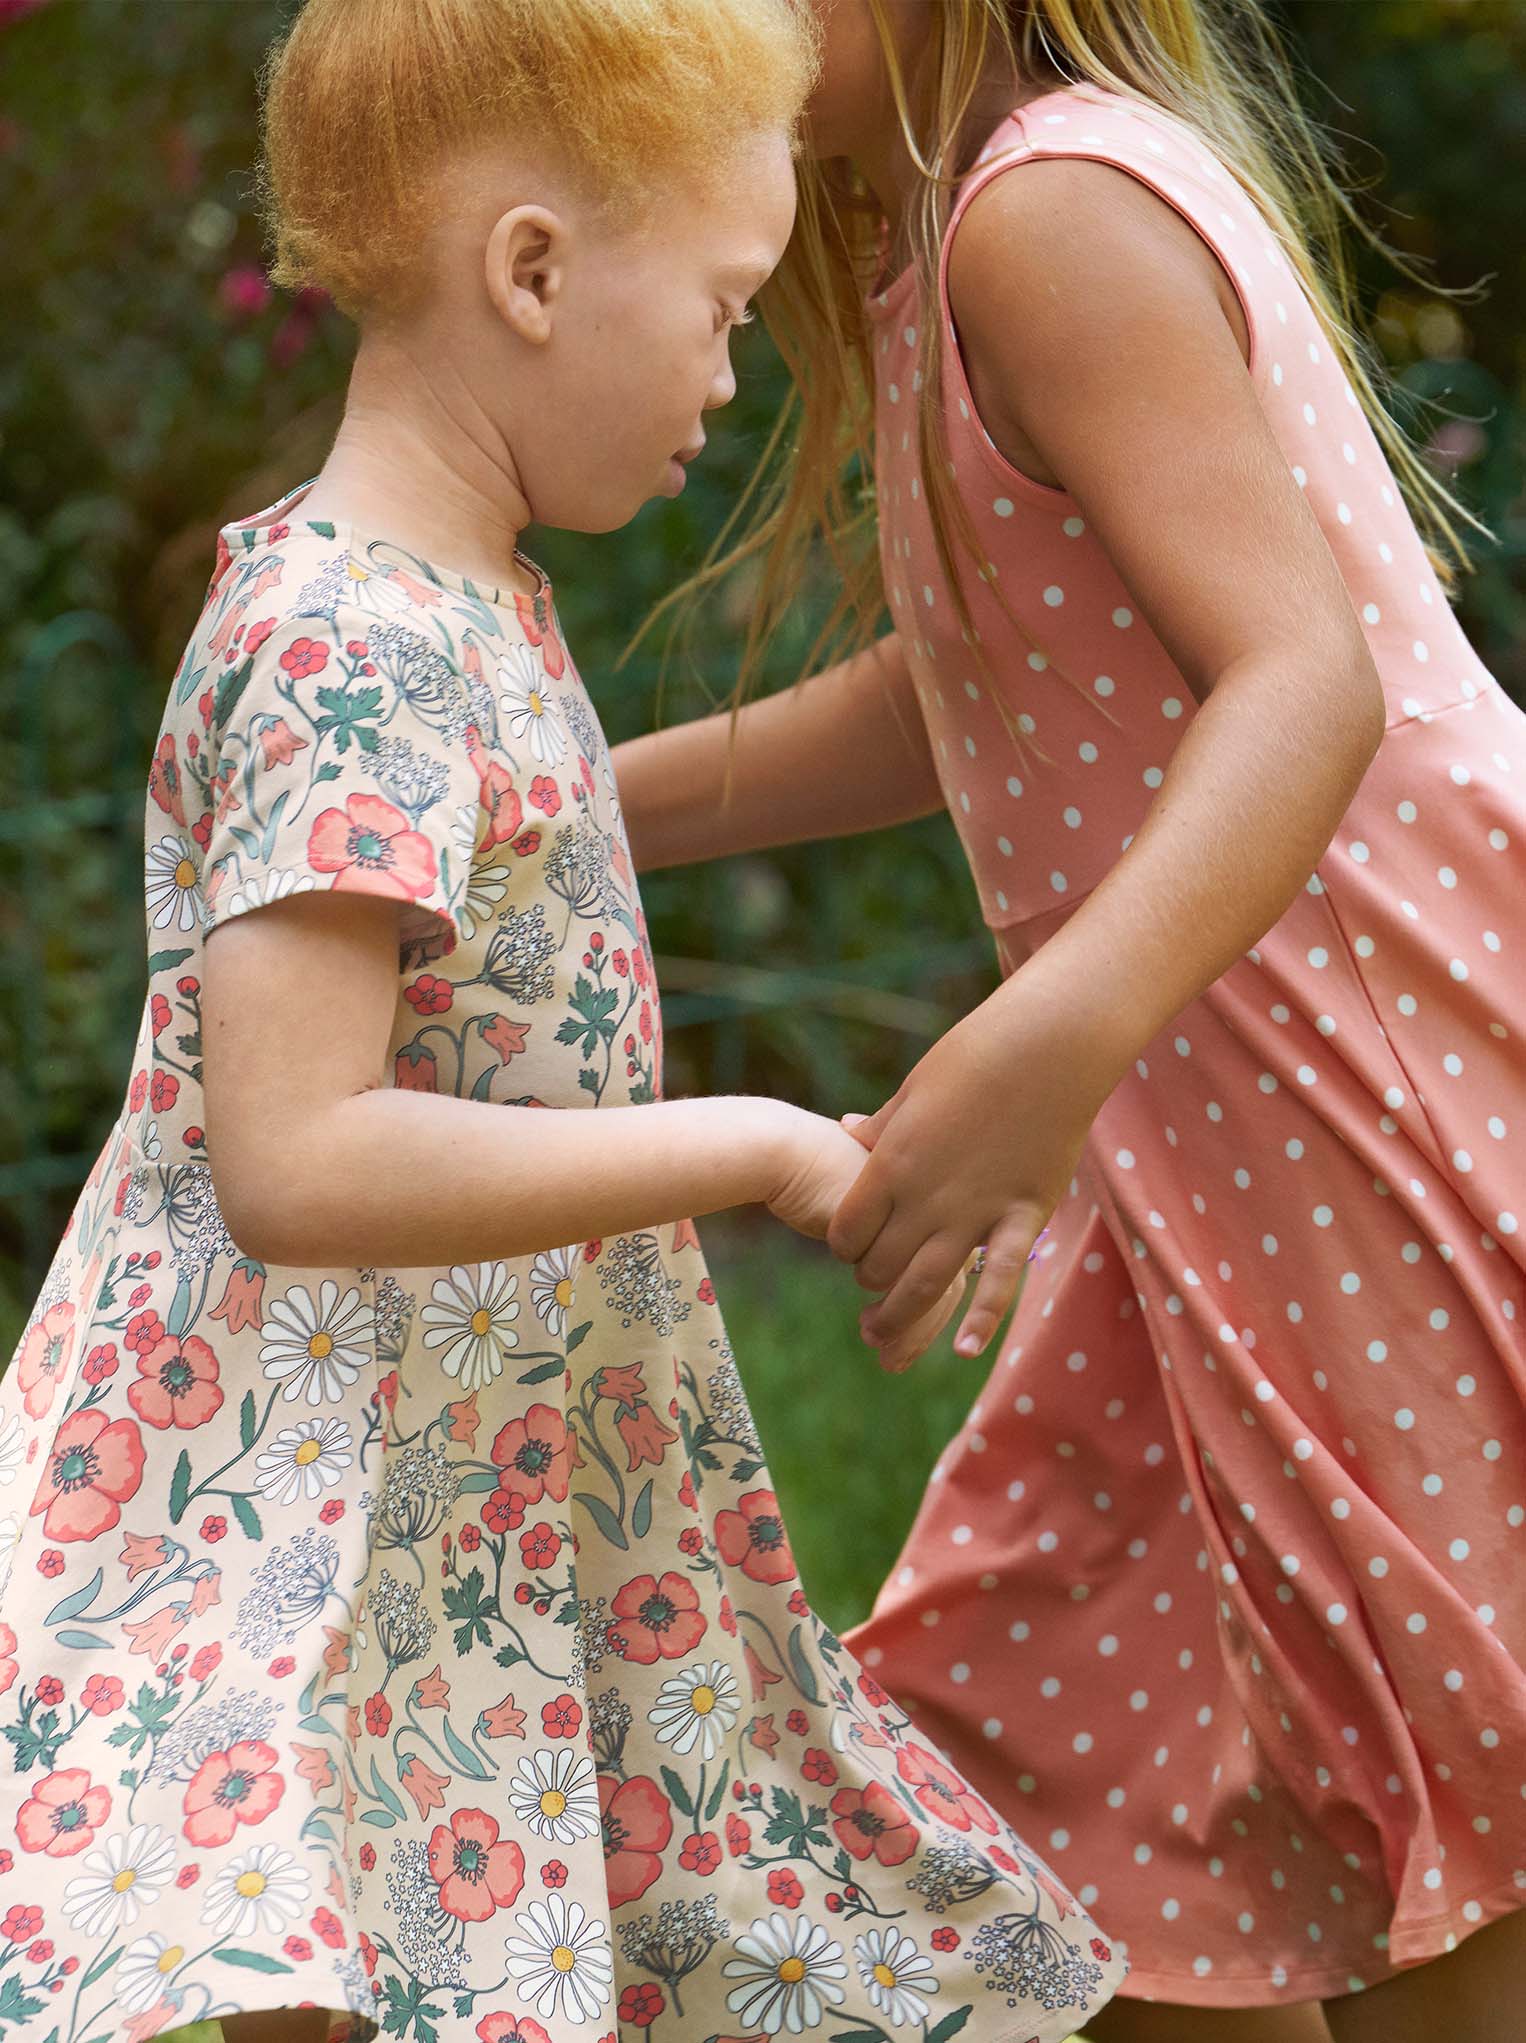 Organic Cotton Floral Girls Dress from Polarn O. Pyret Kidswear. Ethically made and sustainably sourced materials.